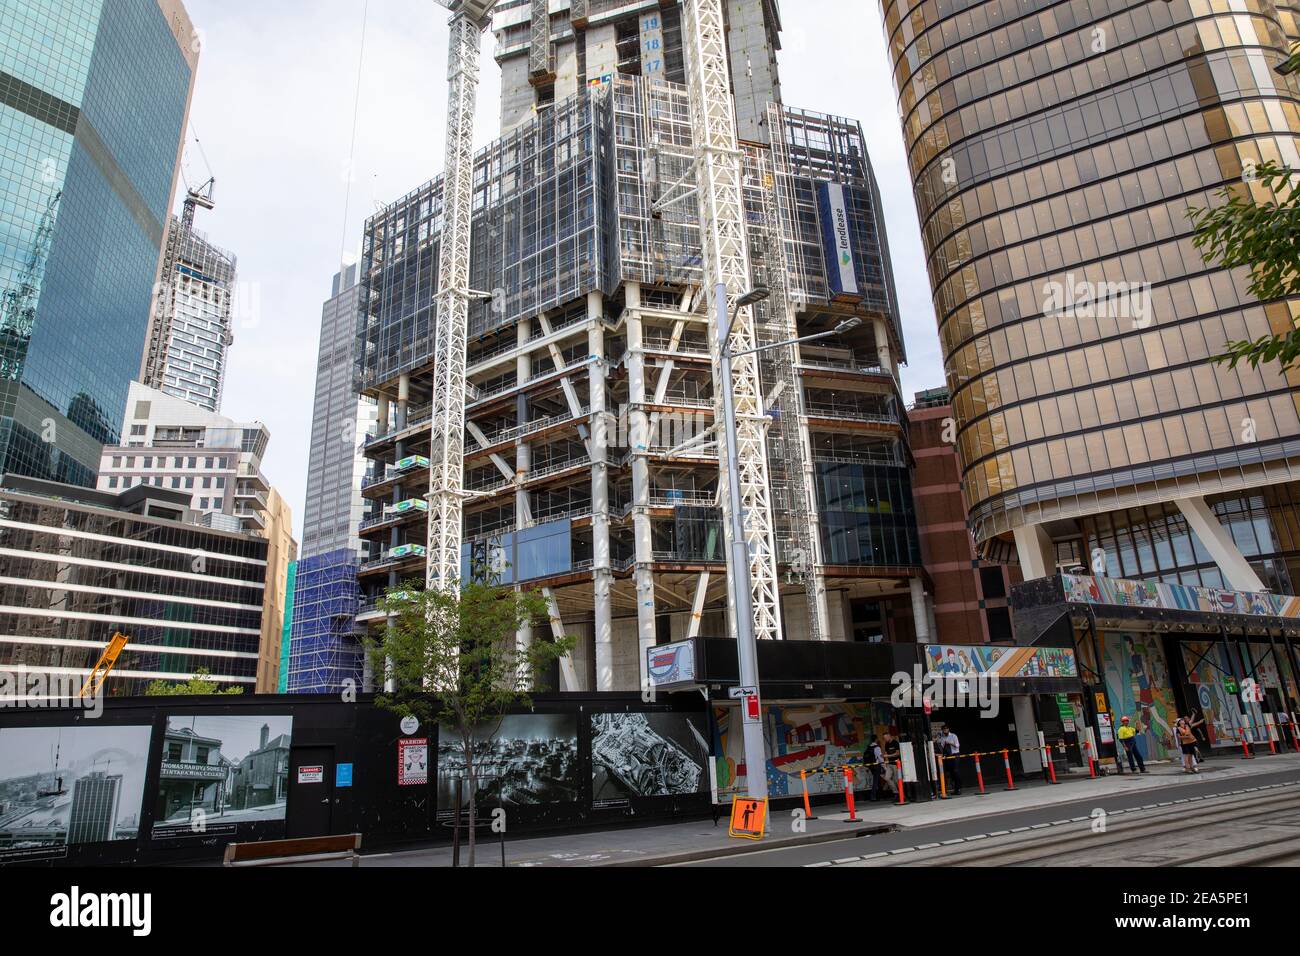 What's being built here in Circular Quay? Its huge… : r/sydney